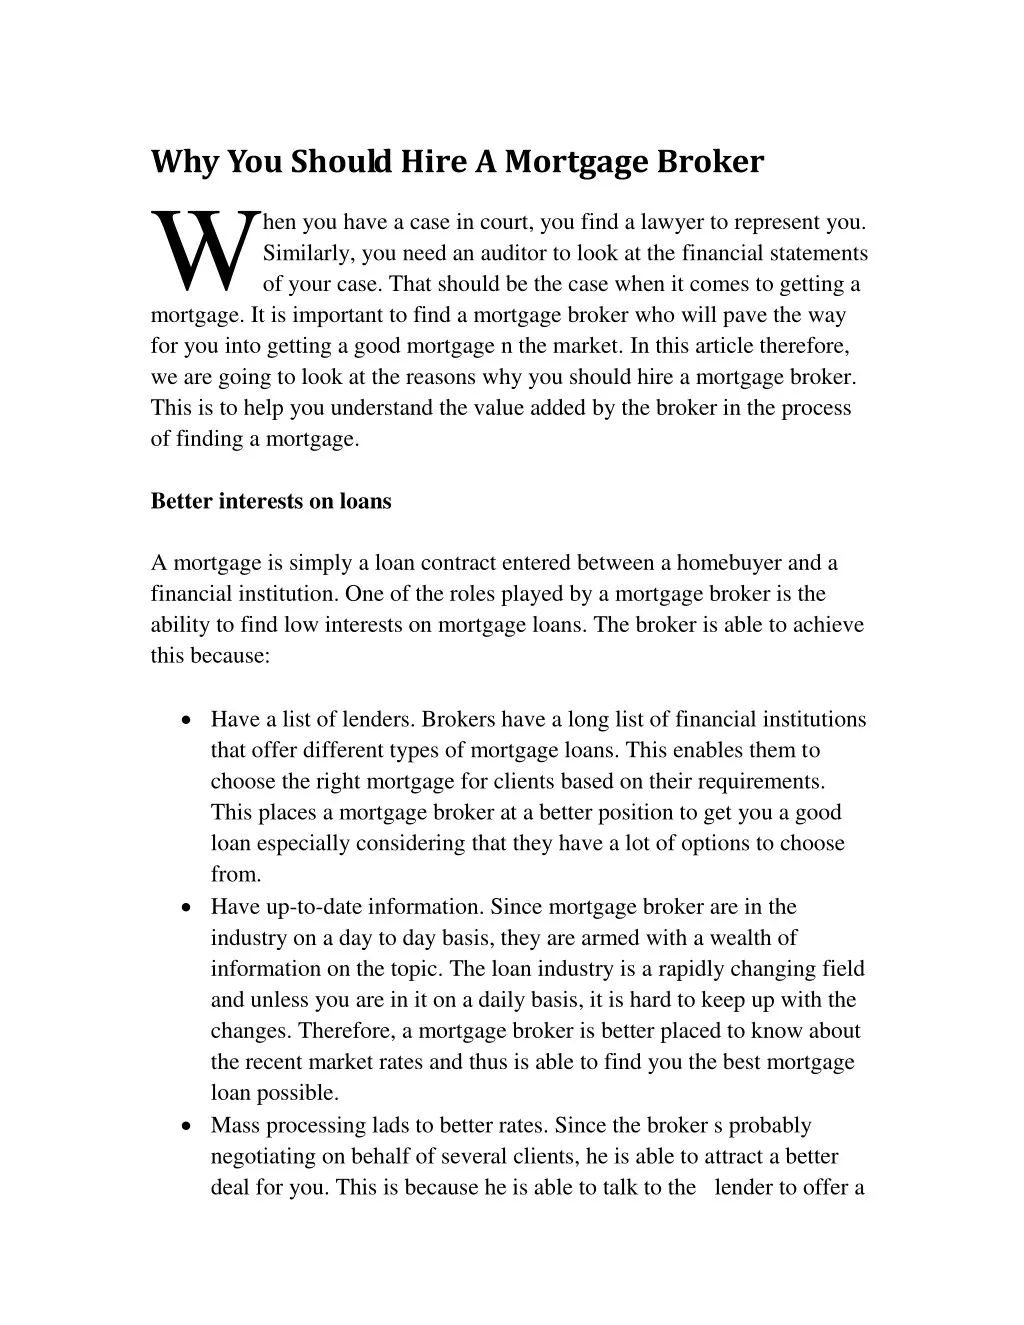 why you should hire a mortgage broker